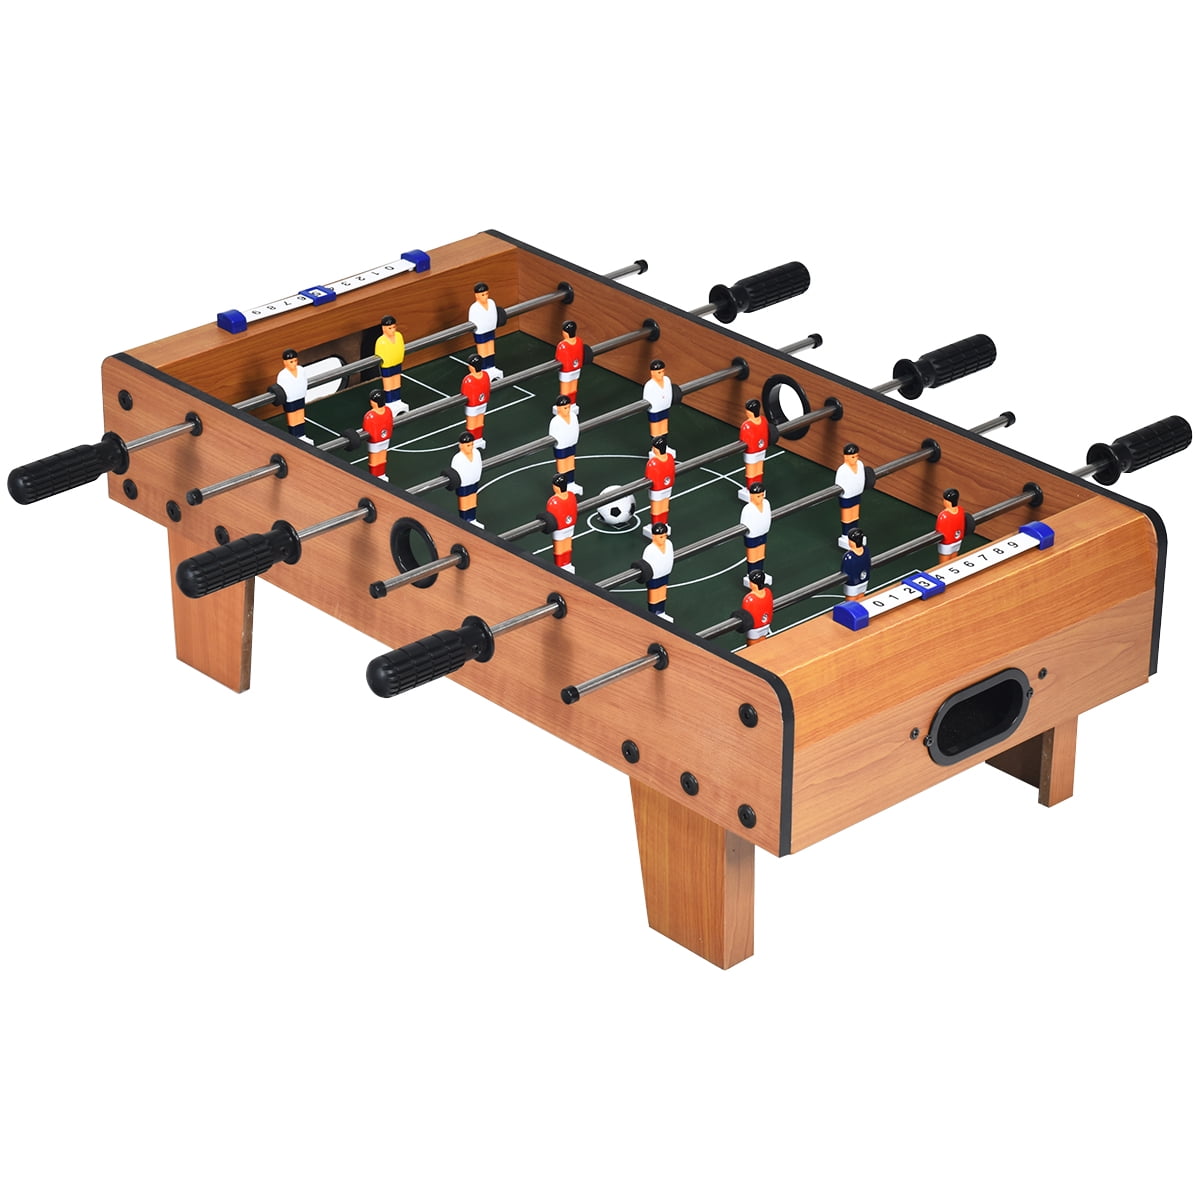 Wooden Football Table Top Football Soccer Game Set Kids Family Game Xmas Gift 